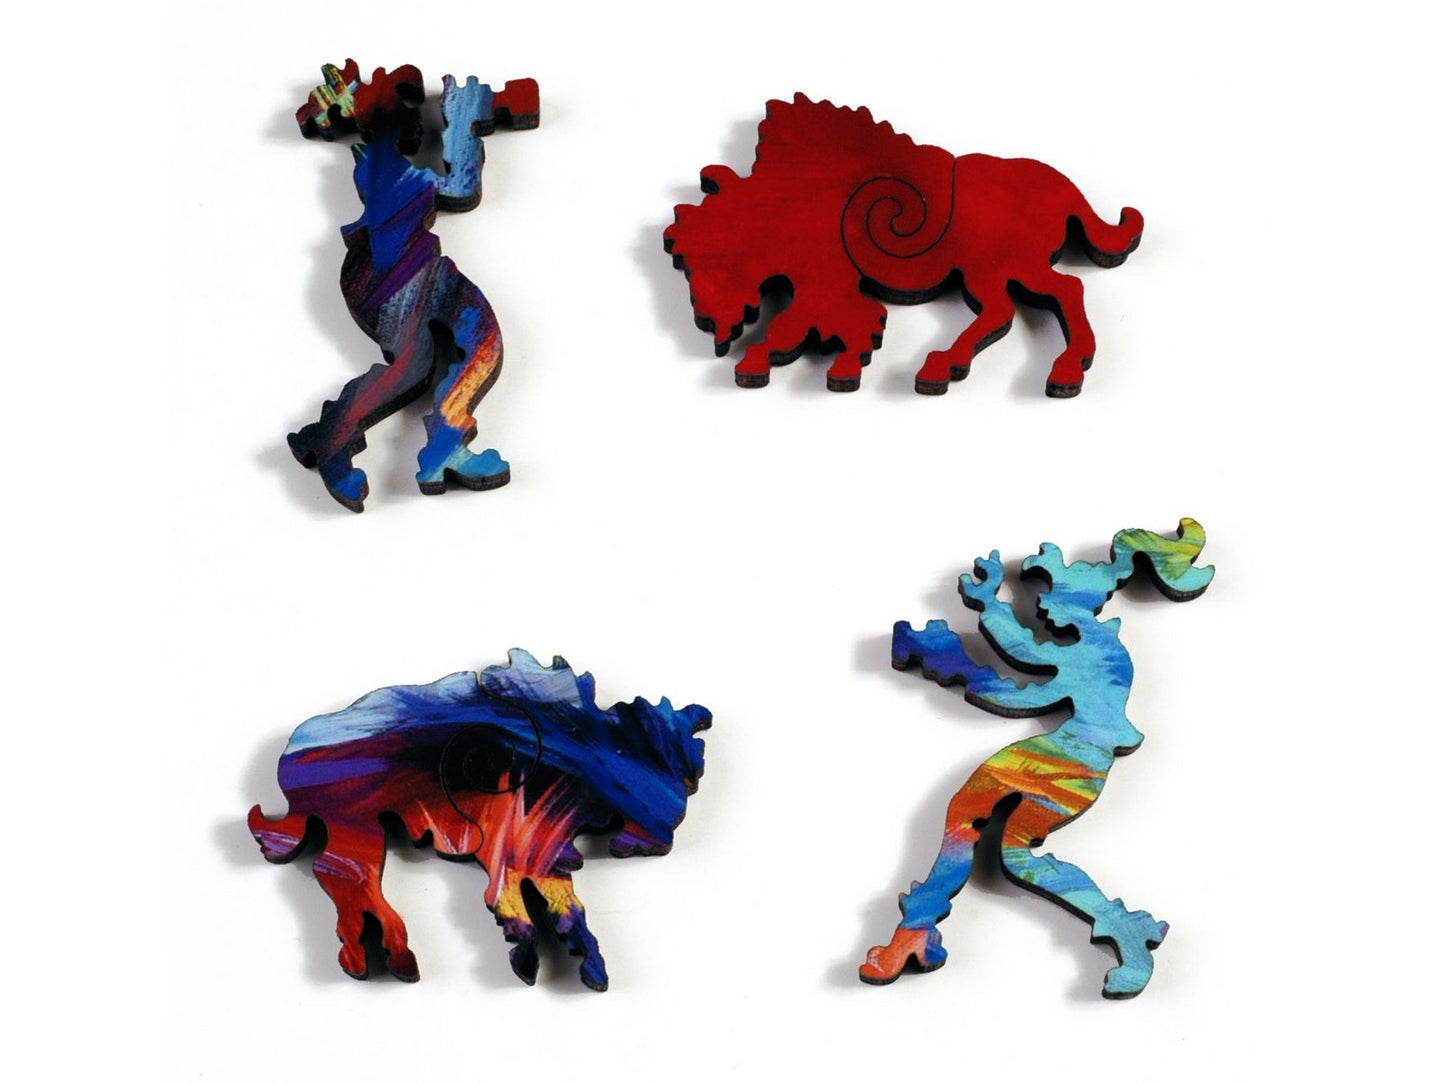 A closeup of pieces in the shapes of two people and two bison.